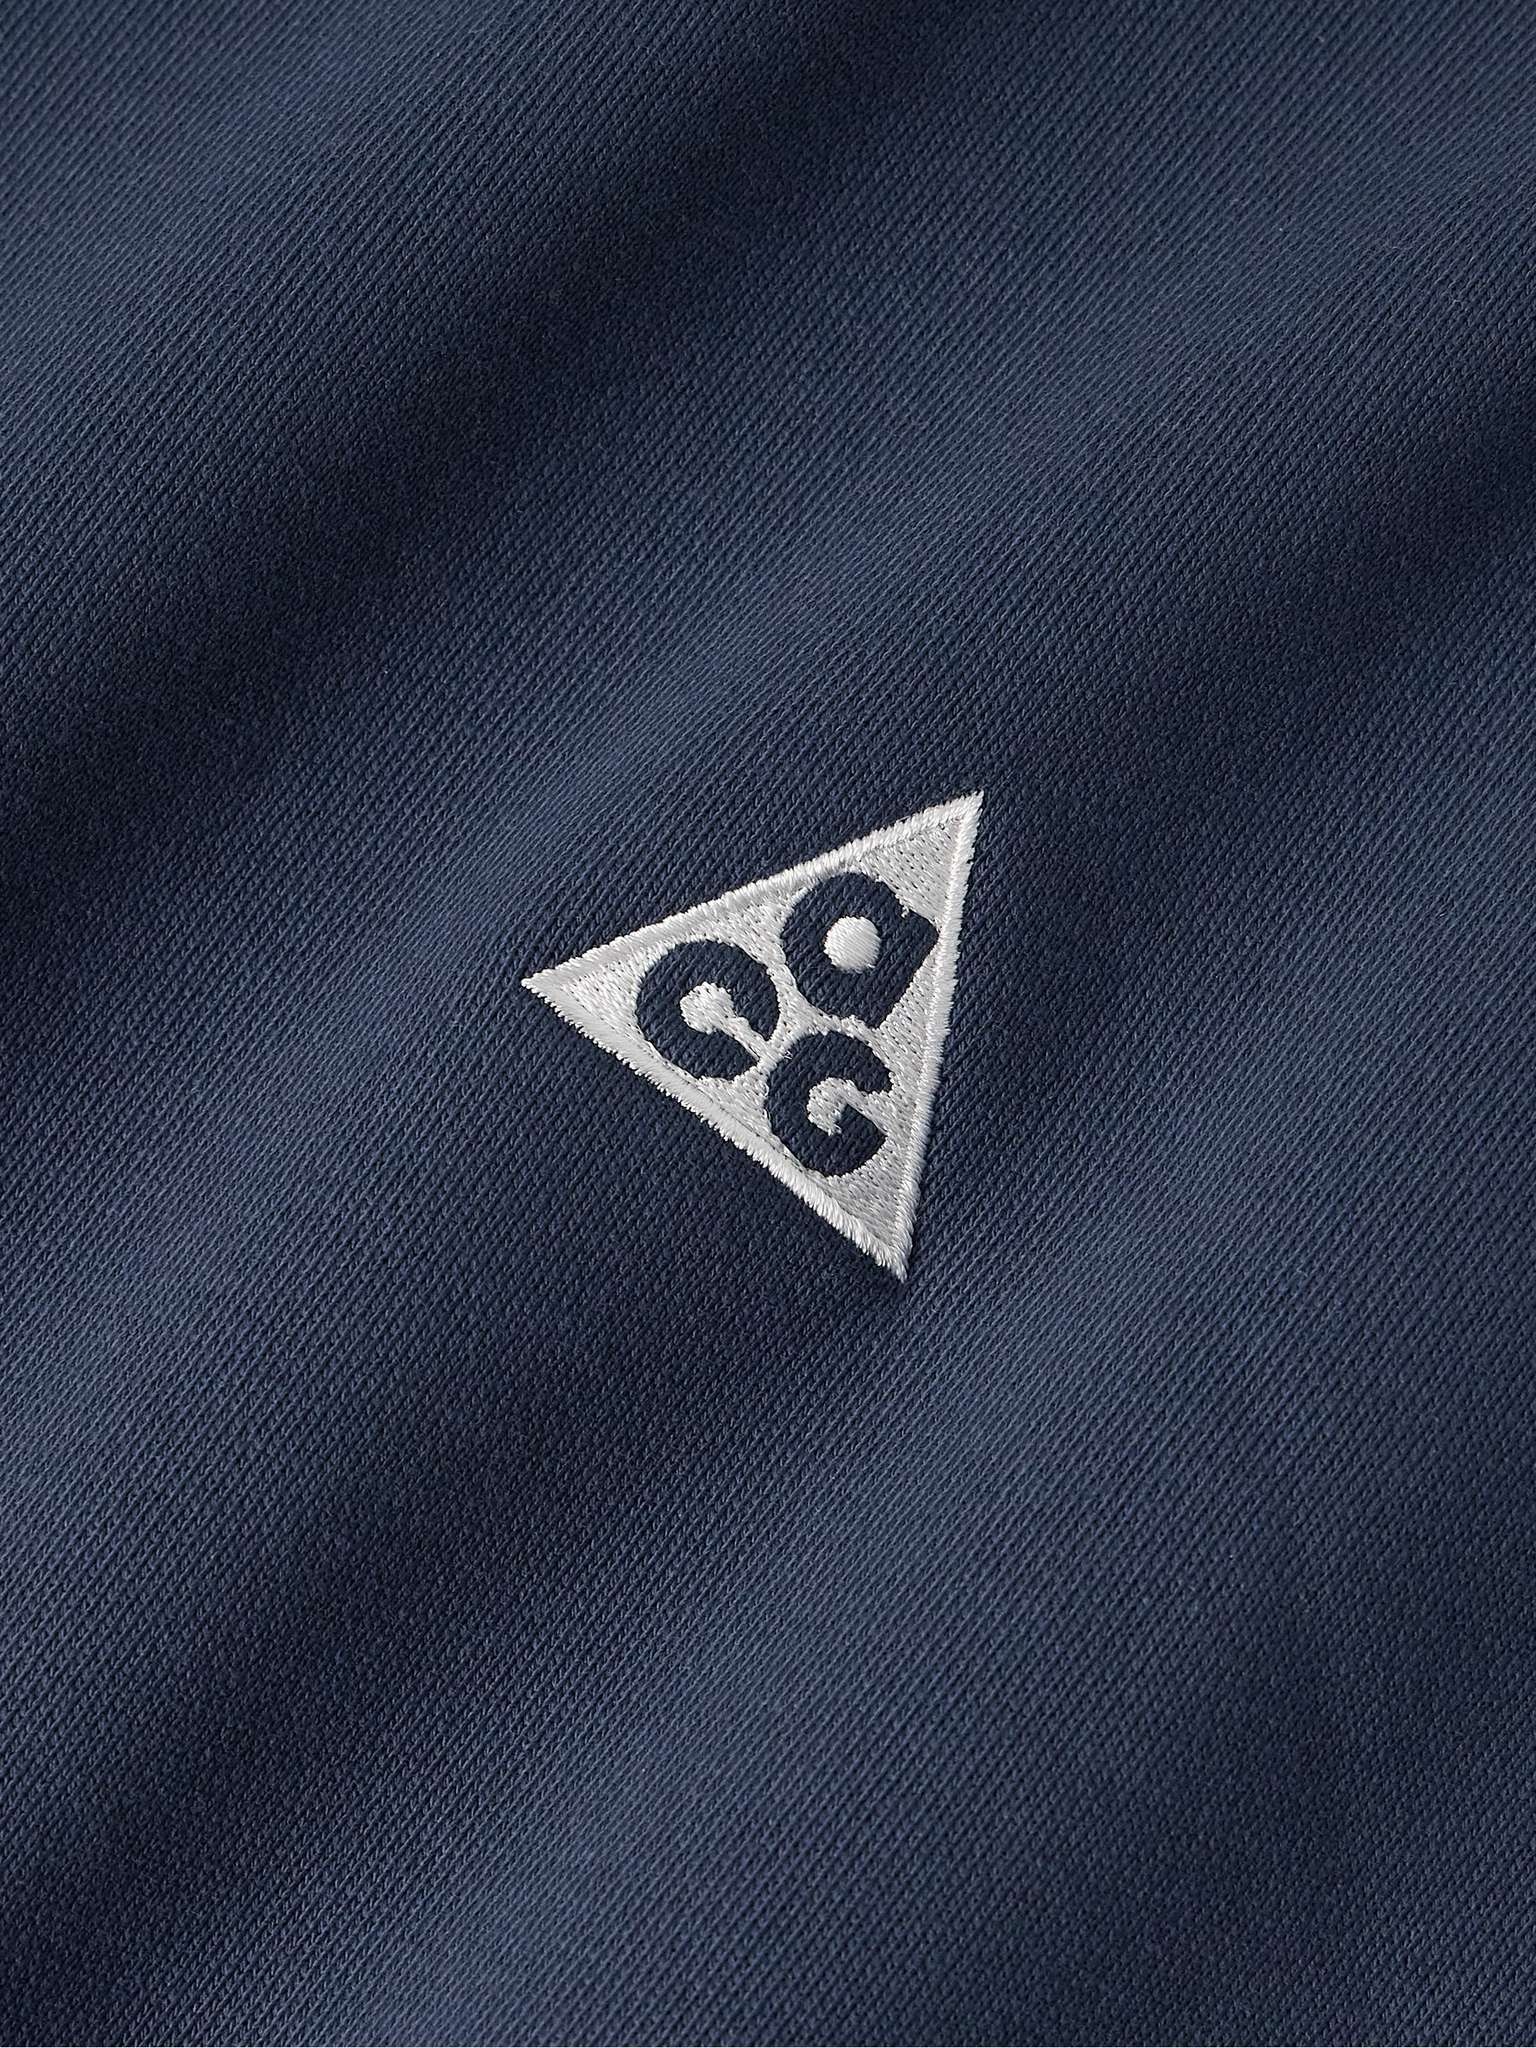 ACG Logo-Embroidered Therma-FIT Sweatshirt - 4